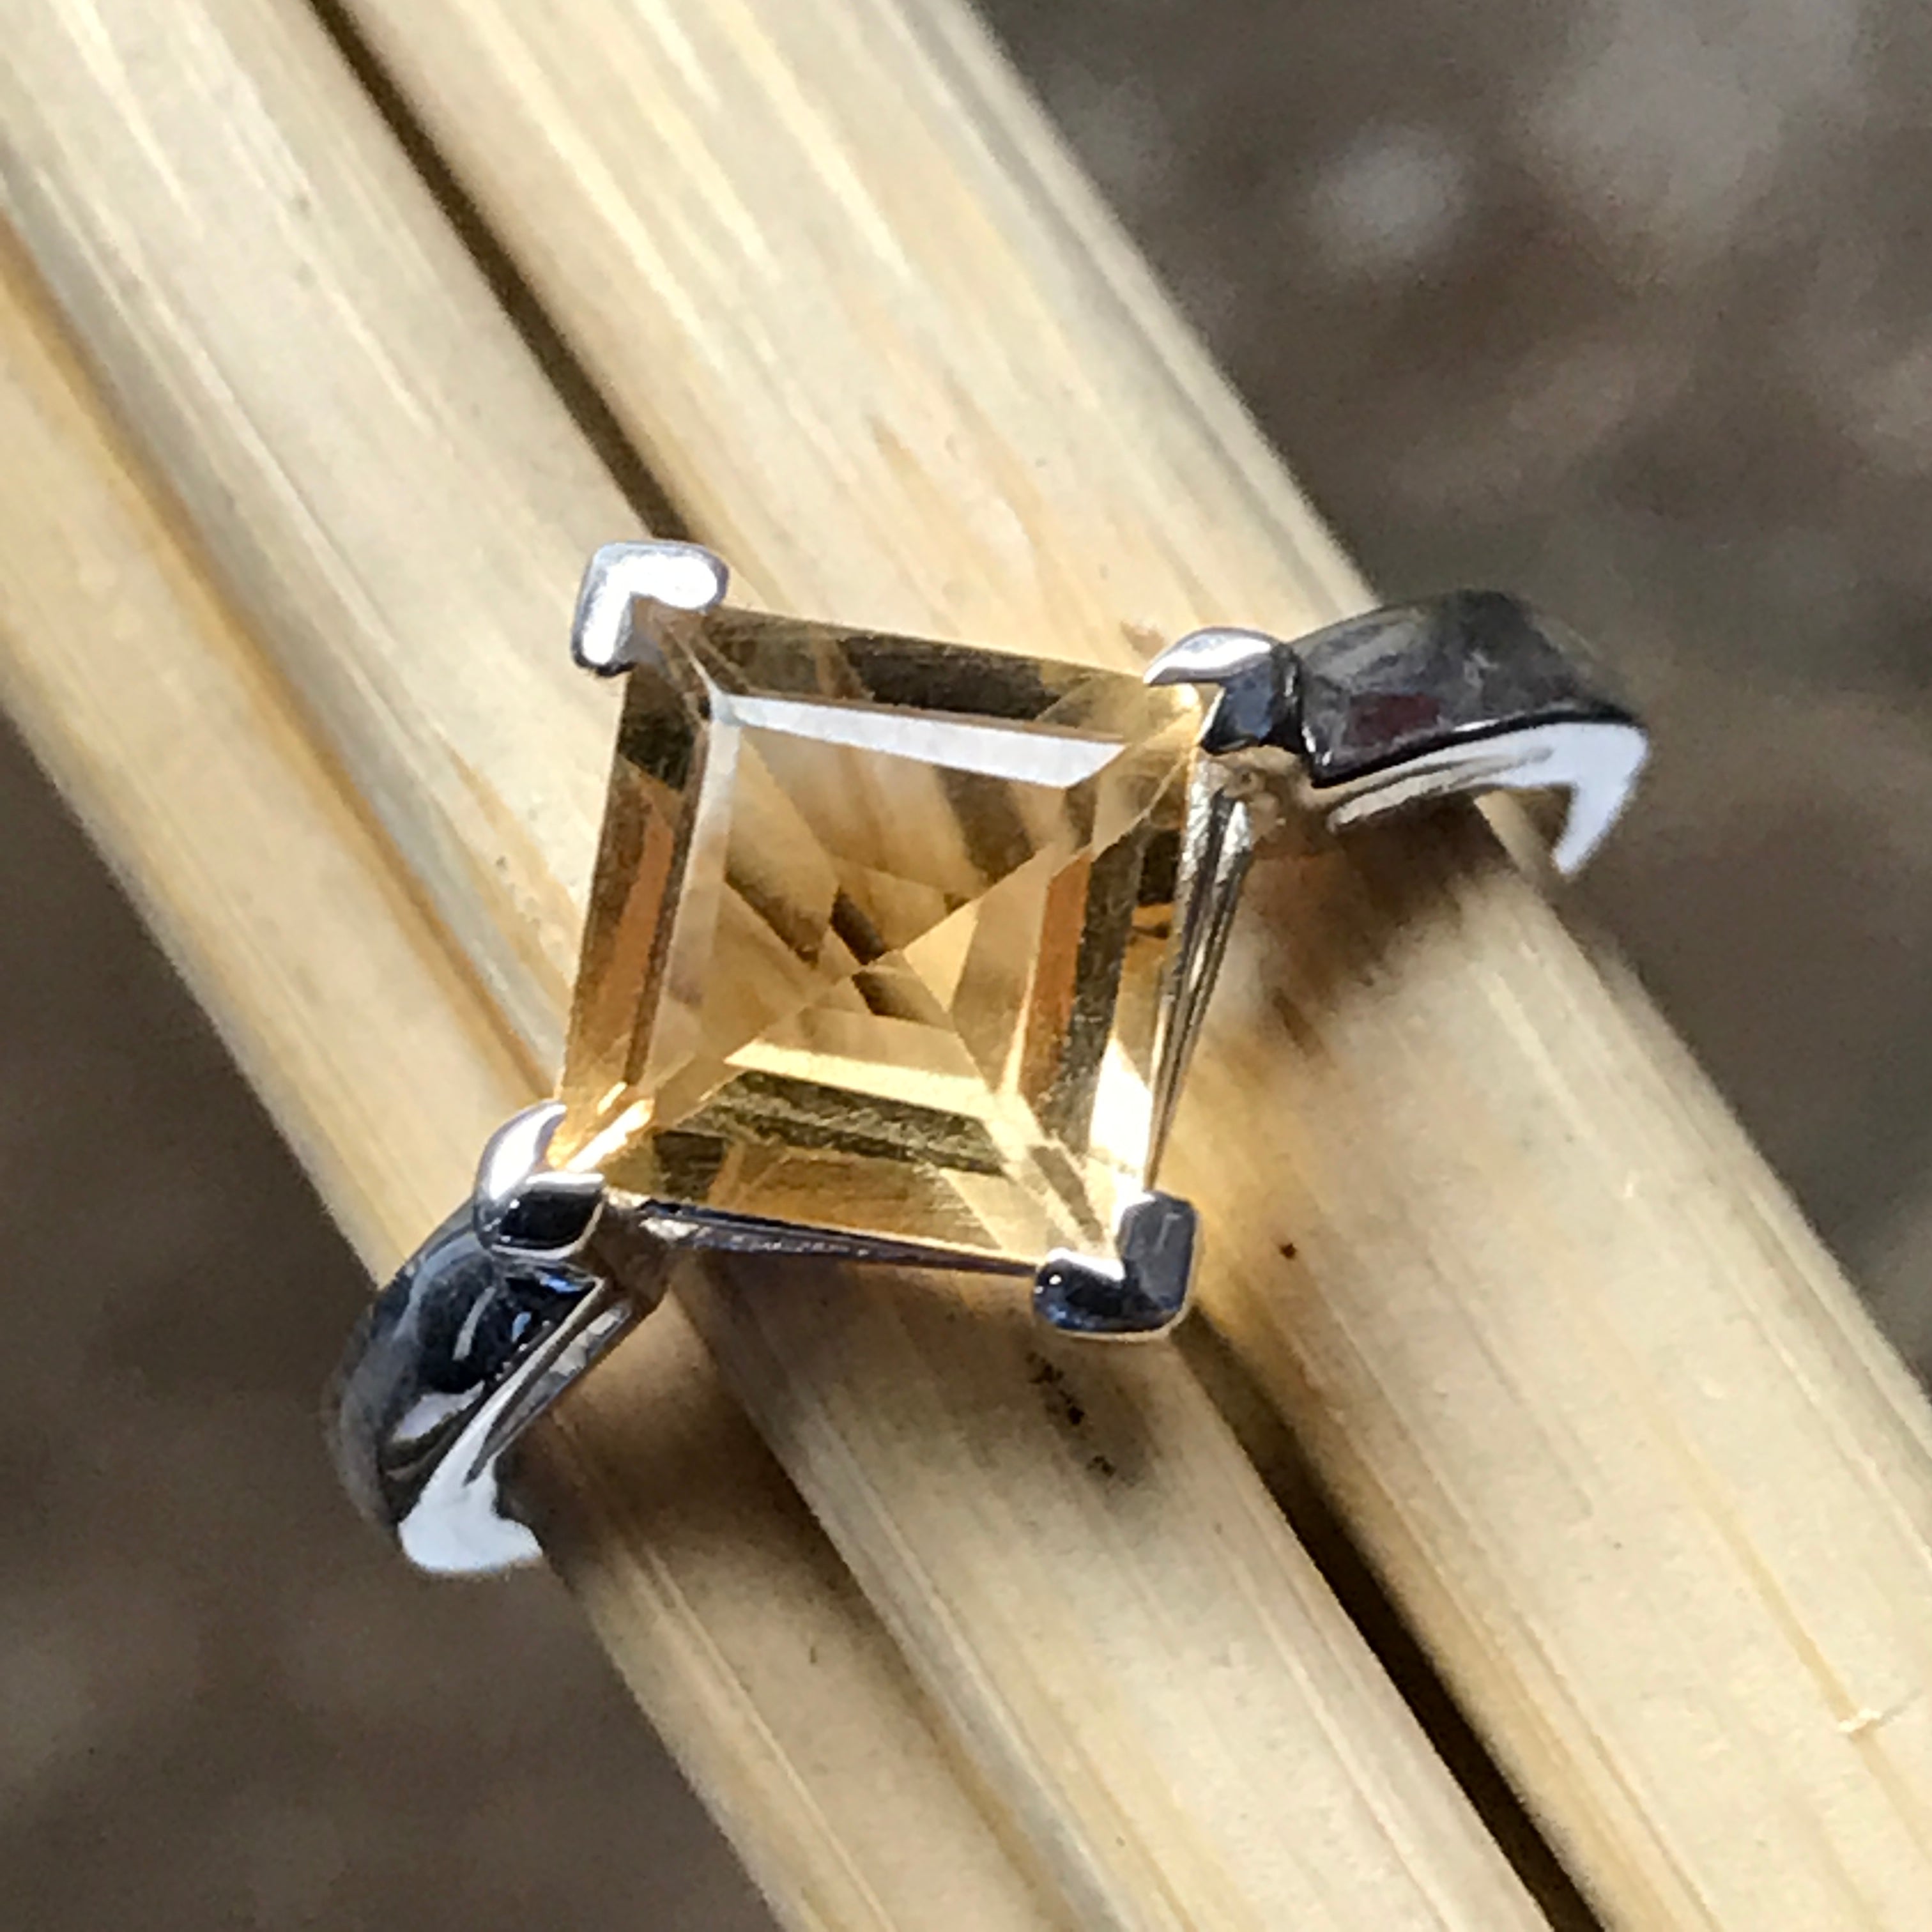 Natural 1.5ct Golden Citrine 925 Solid Sterling Silver Ring Size 6, 7, 8, 9 - Natural Rocks by Kala